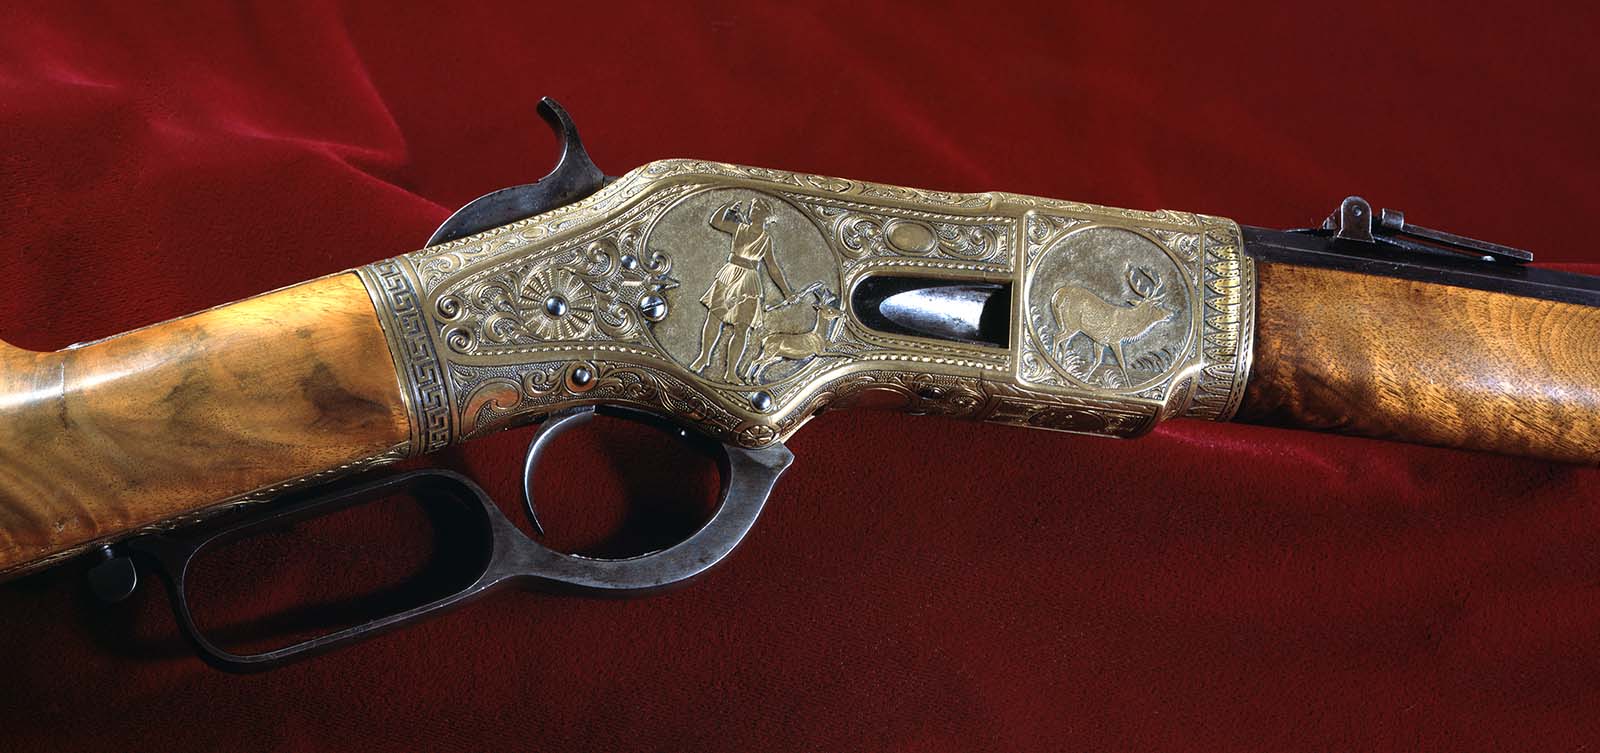 How old is this Smith and Wesson 32 cal revolver hammered serial number  77530? - Quora